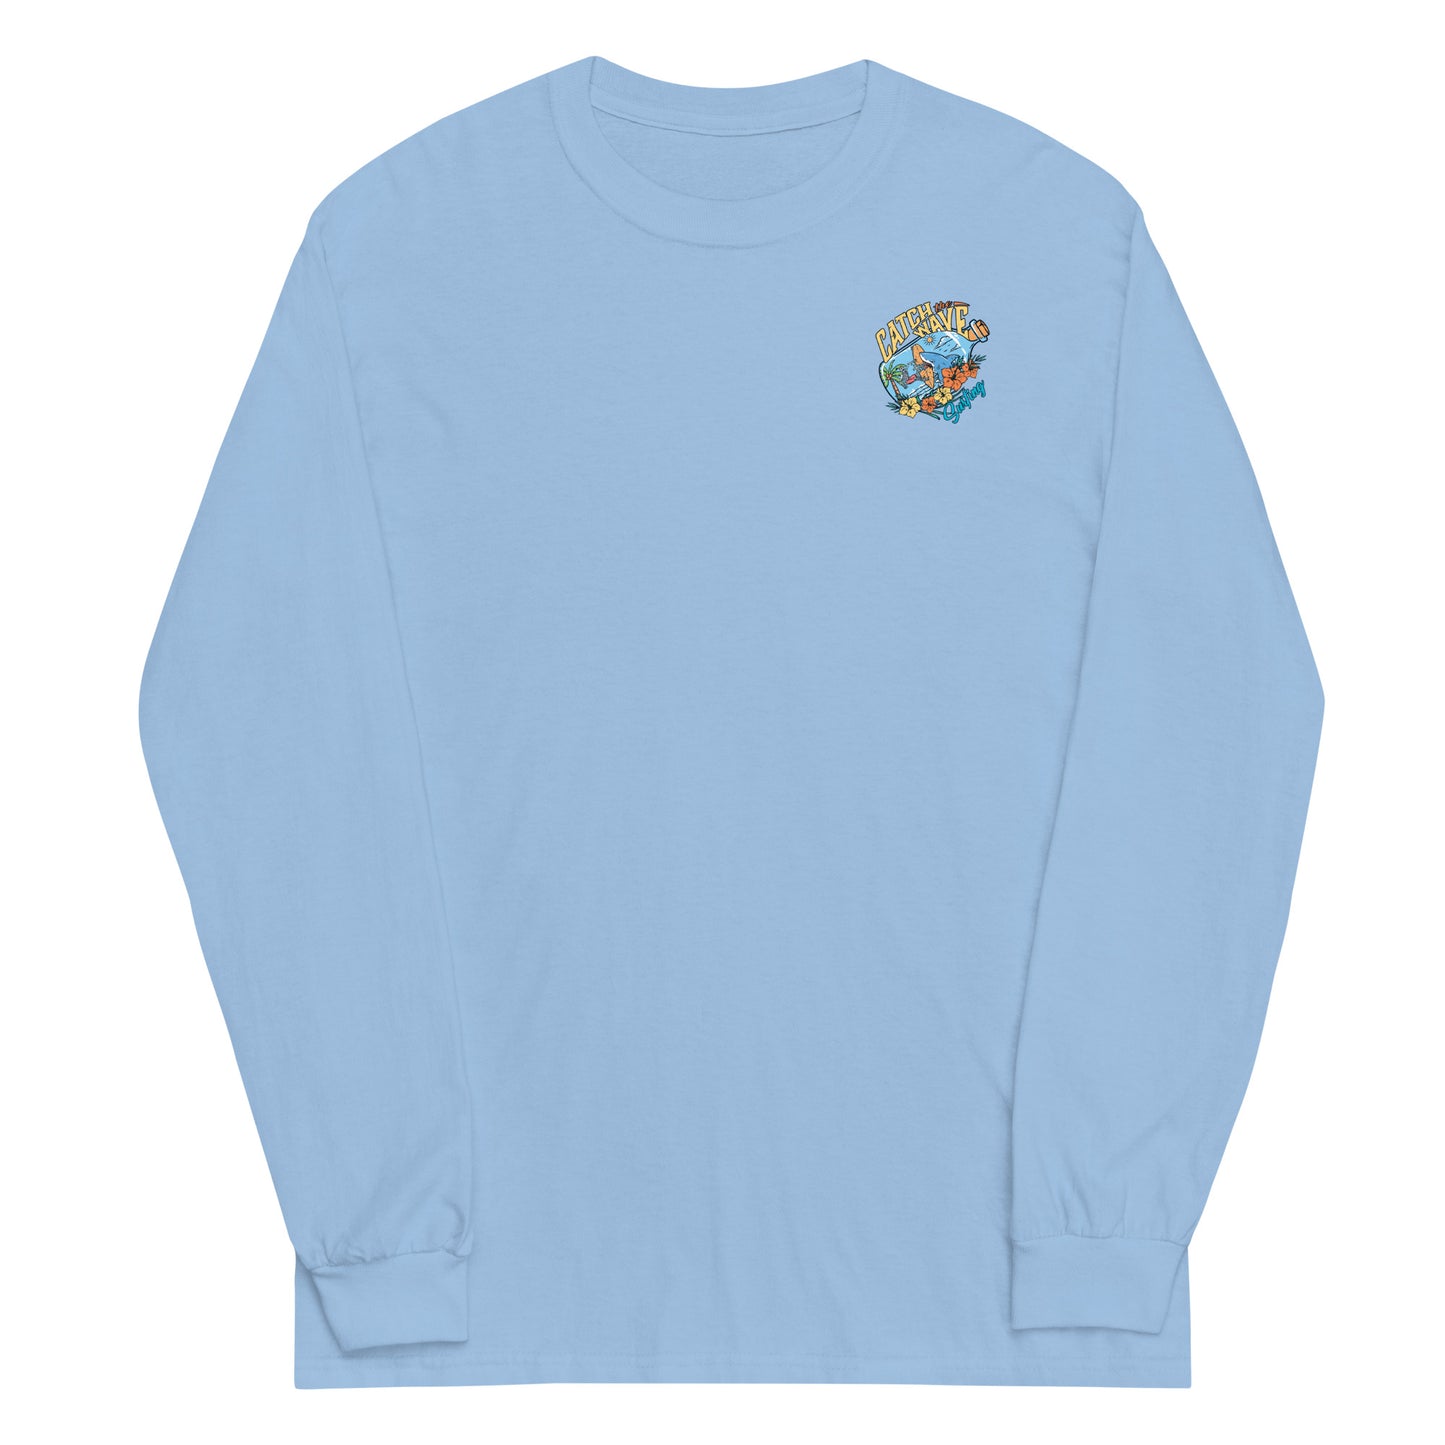 Catch The Wave Long Sleeve Shirt